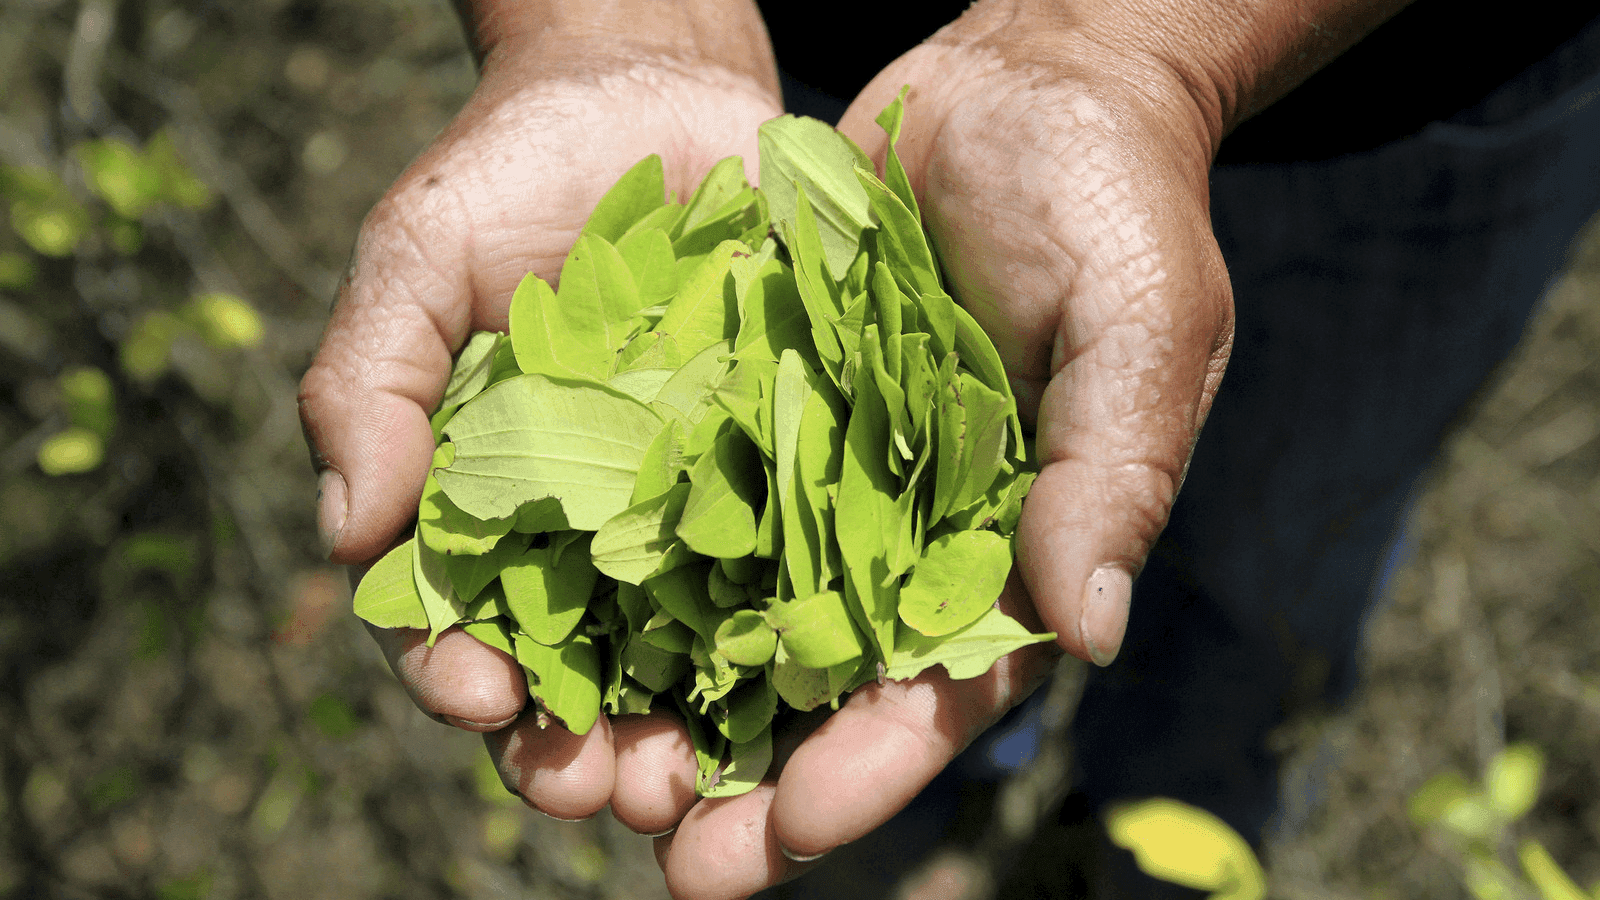 coca leaves in a man's hands in Colombia